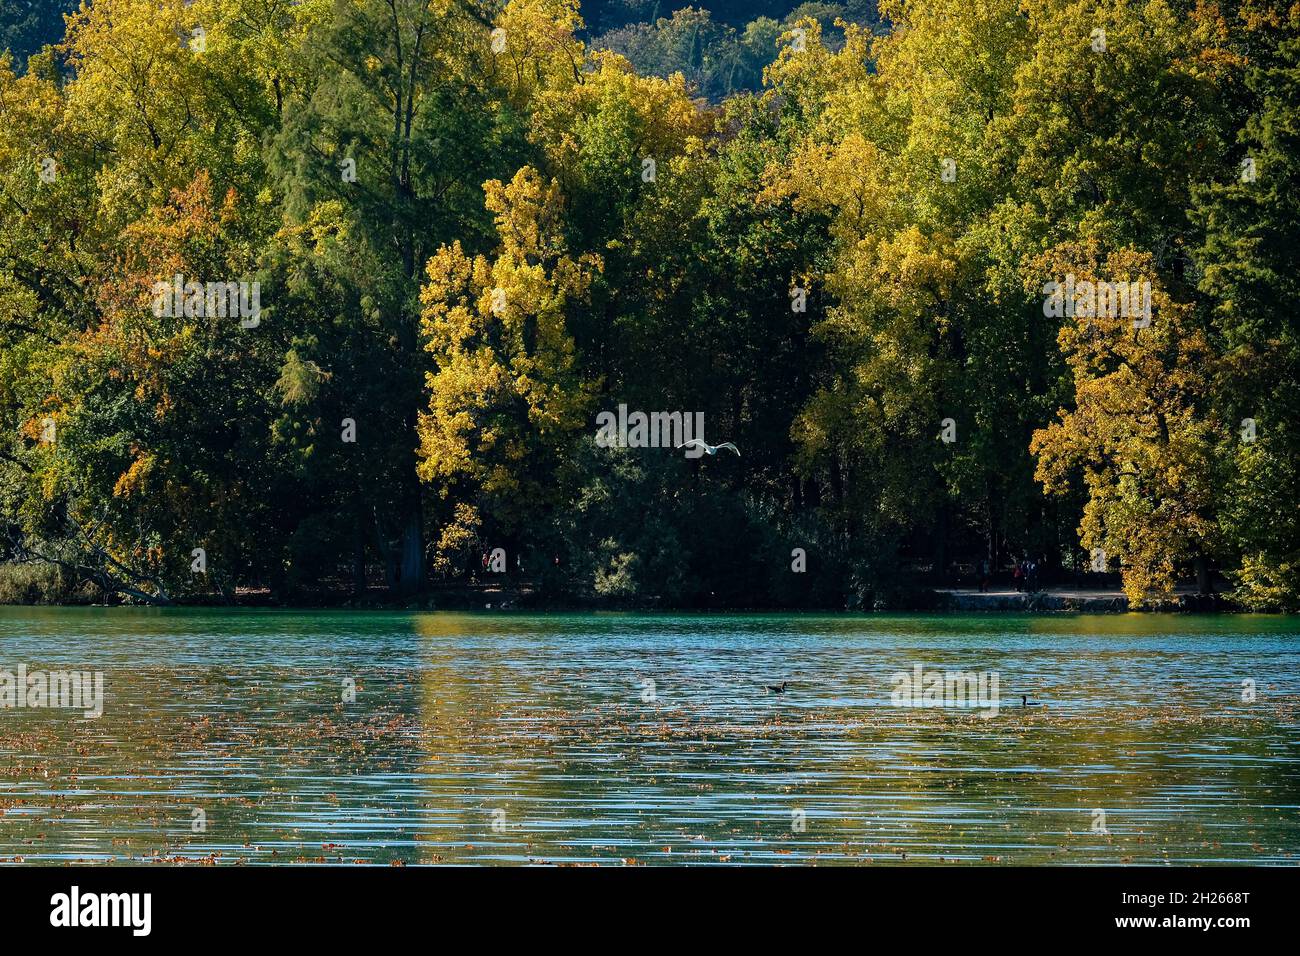 Lyon (France), 19 October 2021. A bird above the lake of the Parc de la Tête d'Or in autumn. Stock Photo